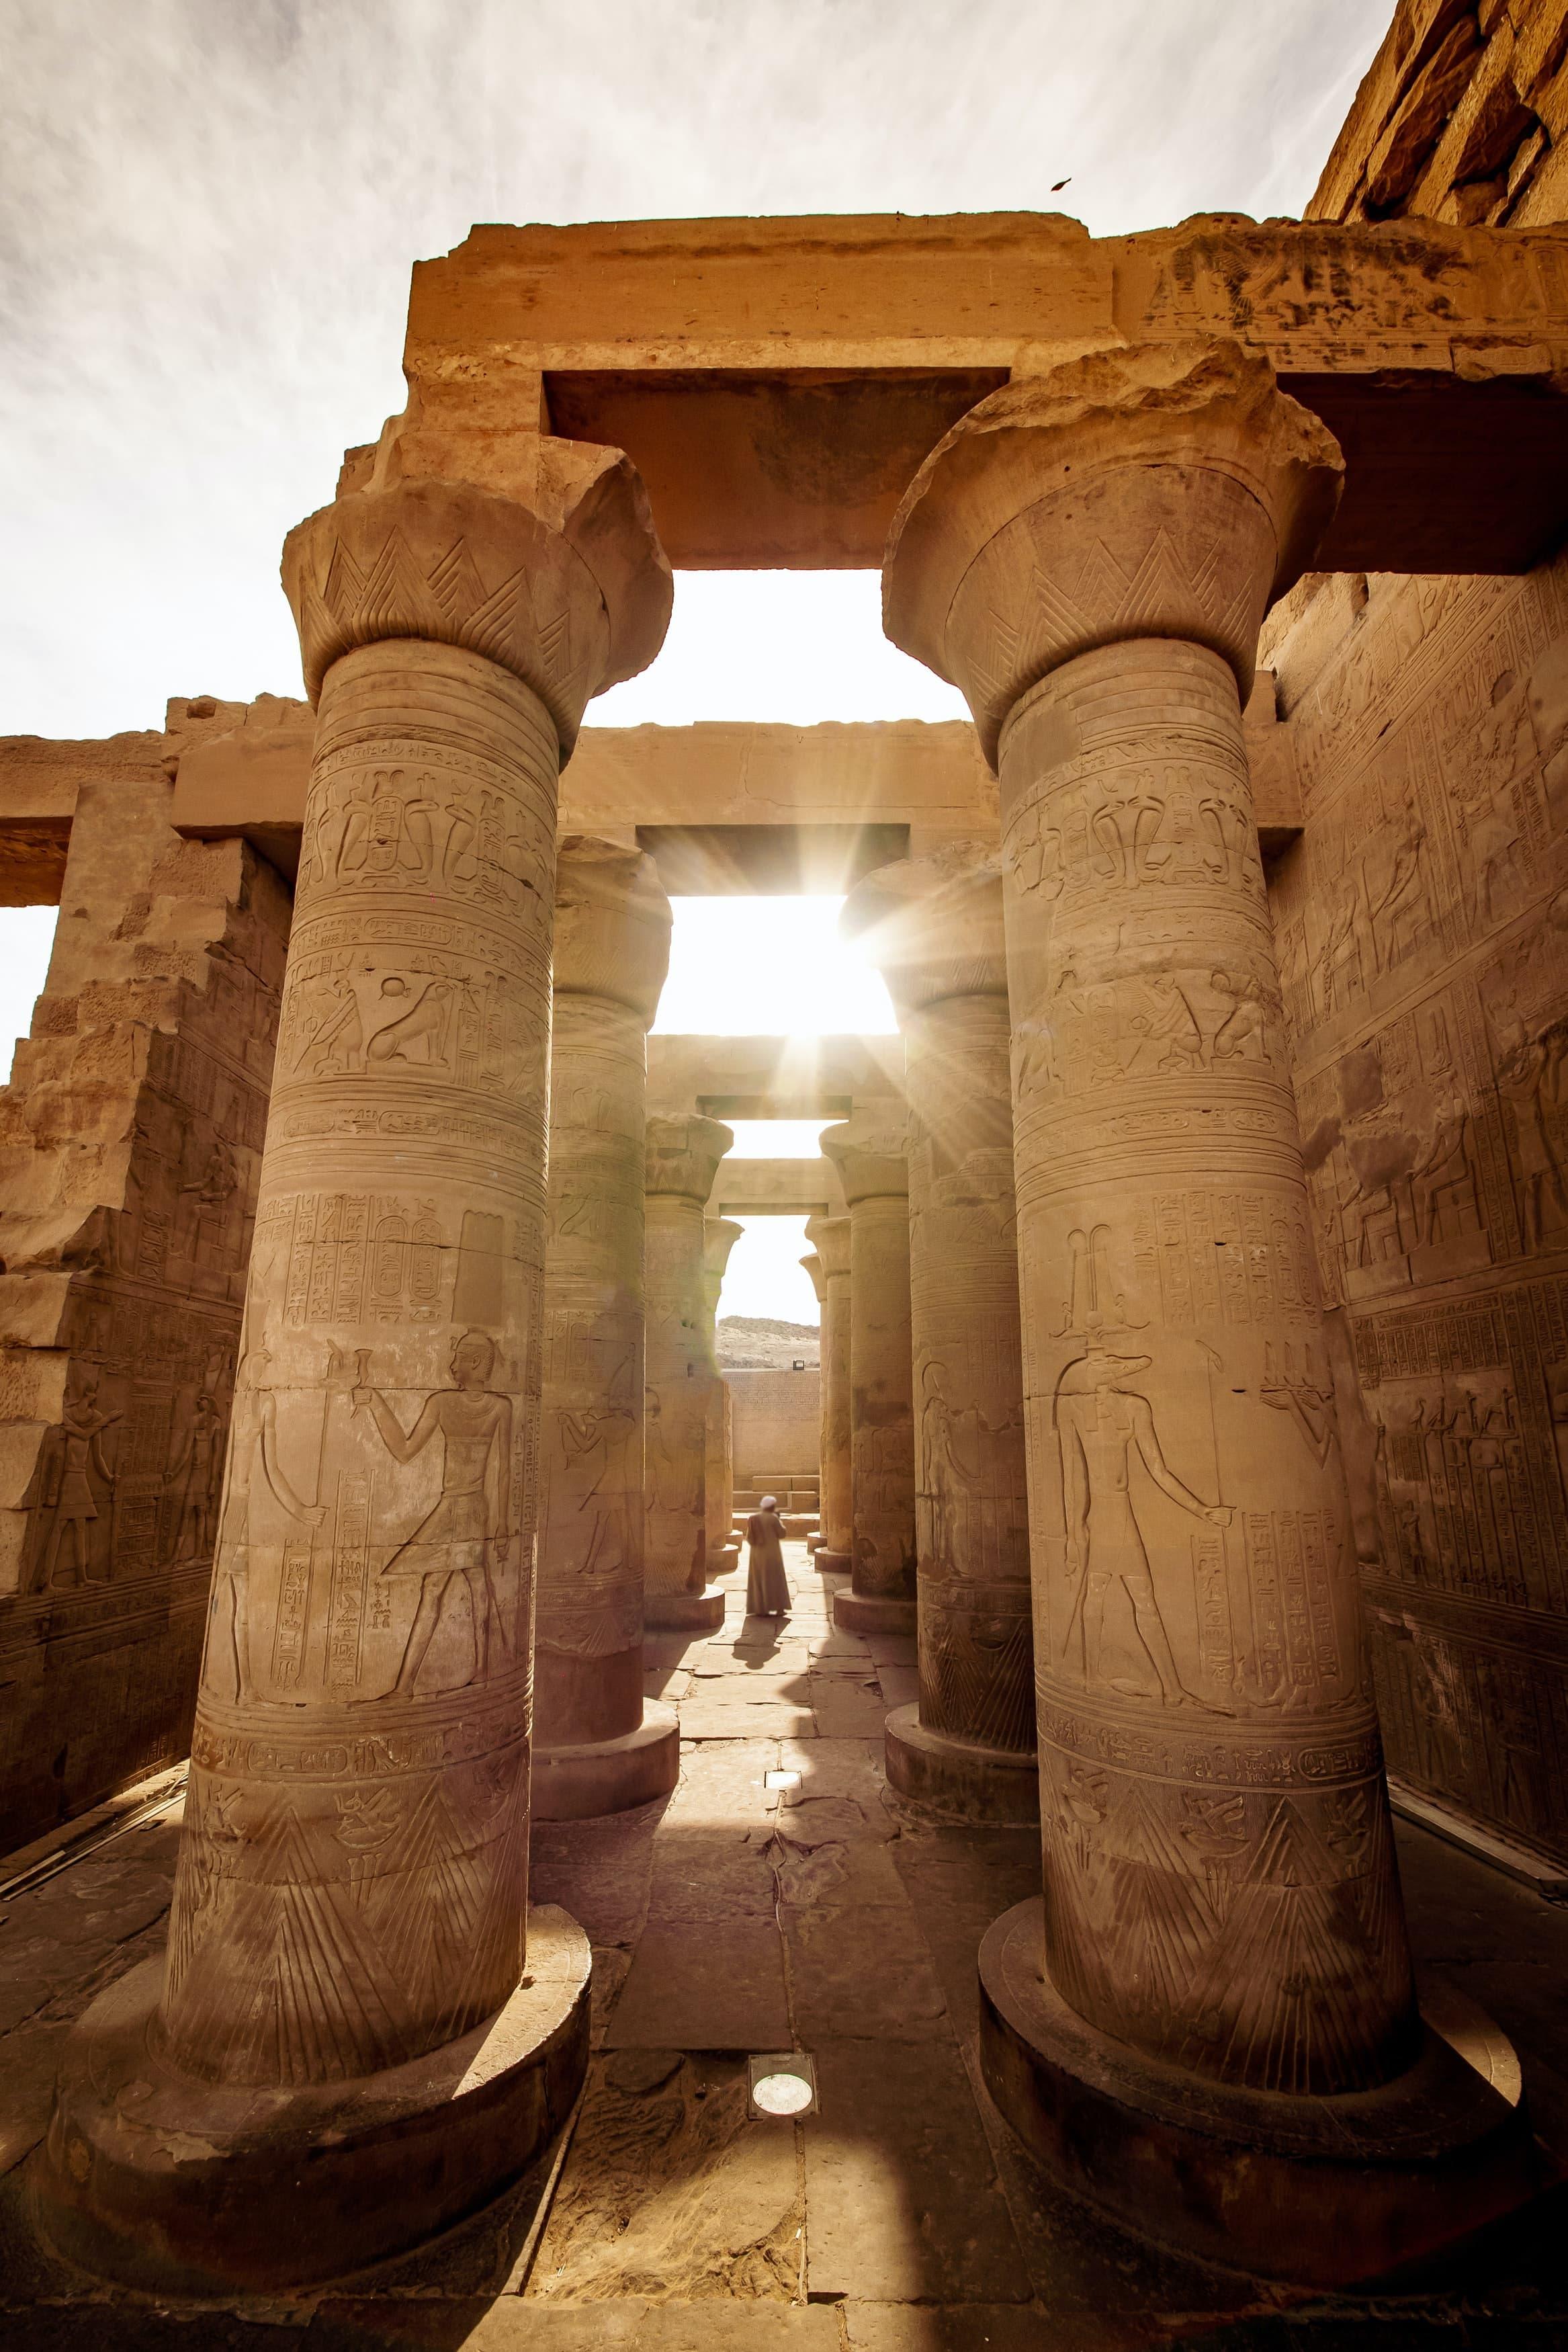 Guided Tours Of Egypt
